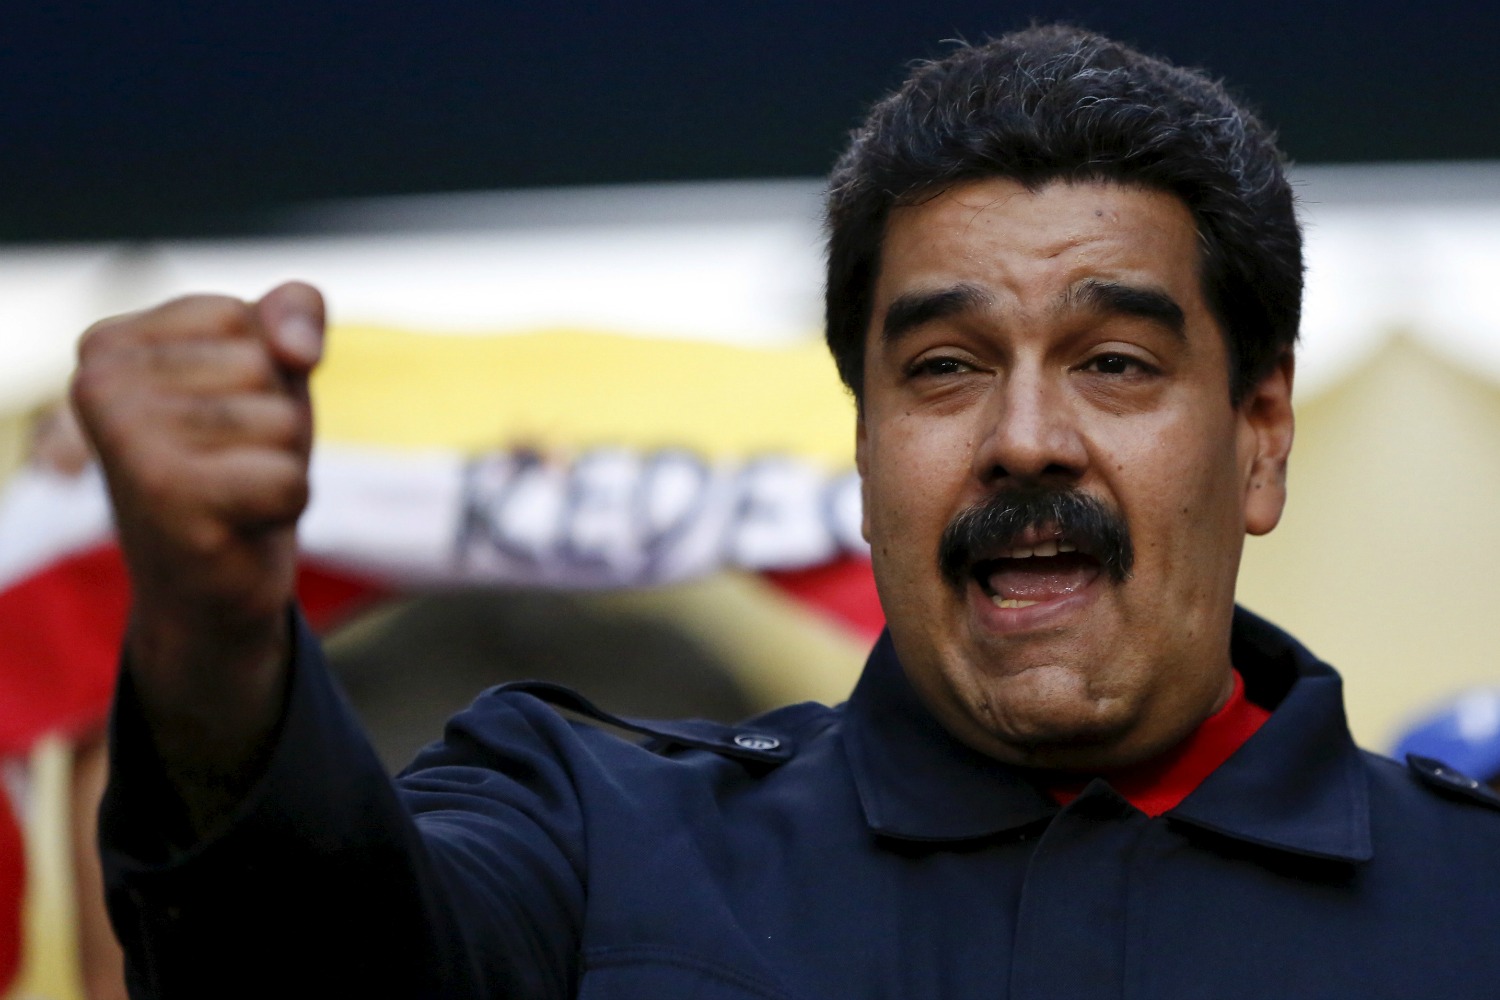 Nicolas Maduro denounced in World Court for crimes against humanity